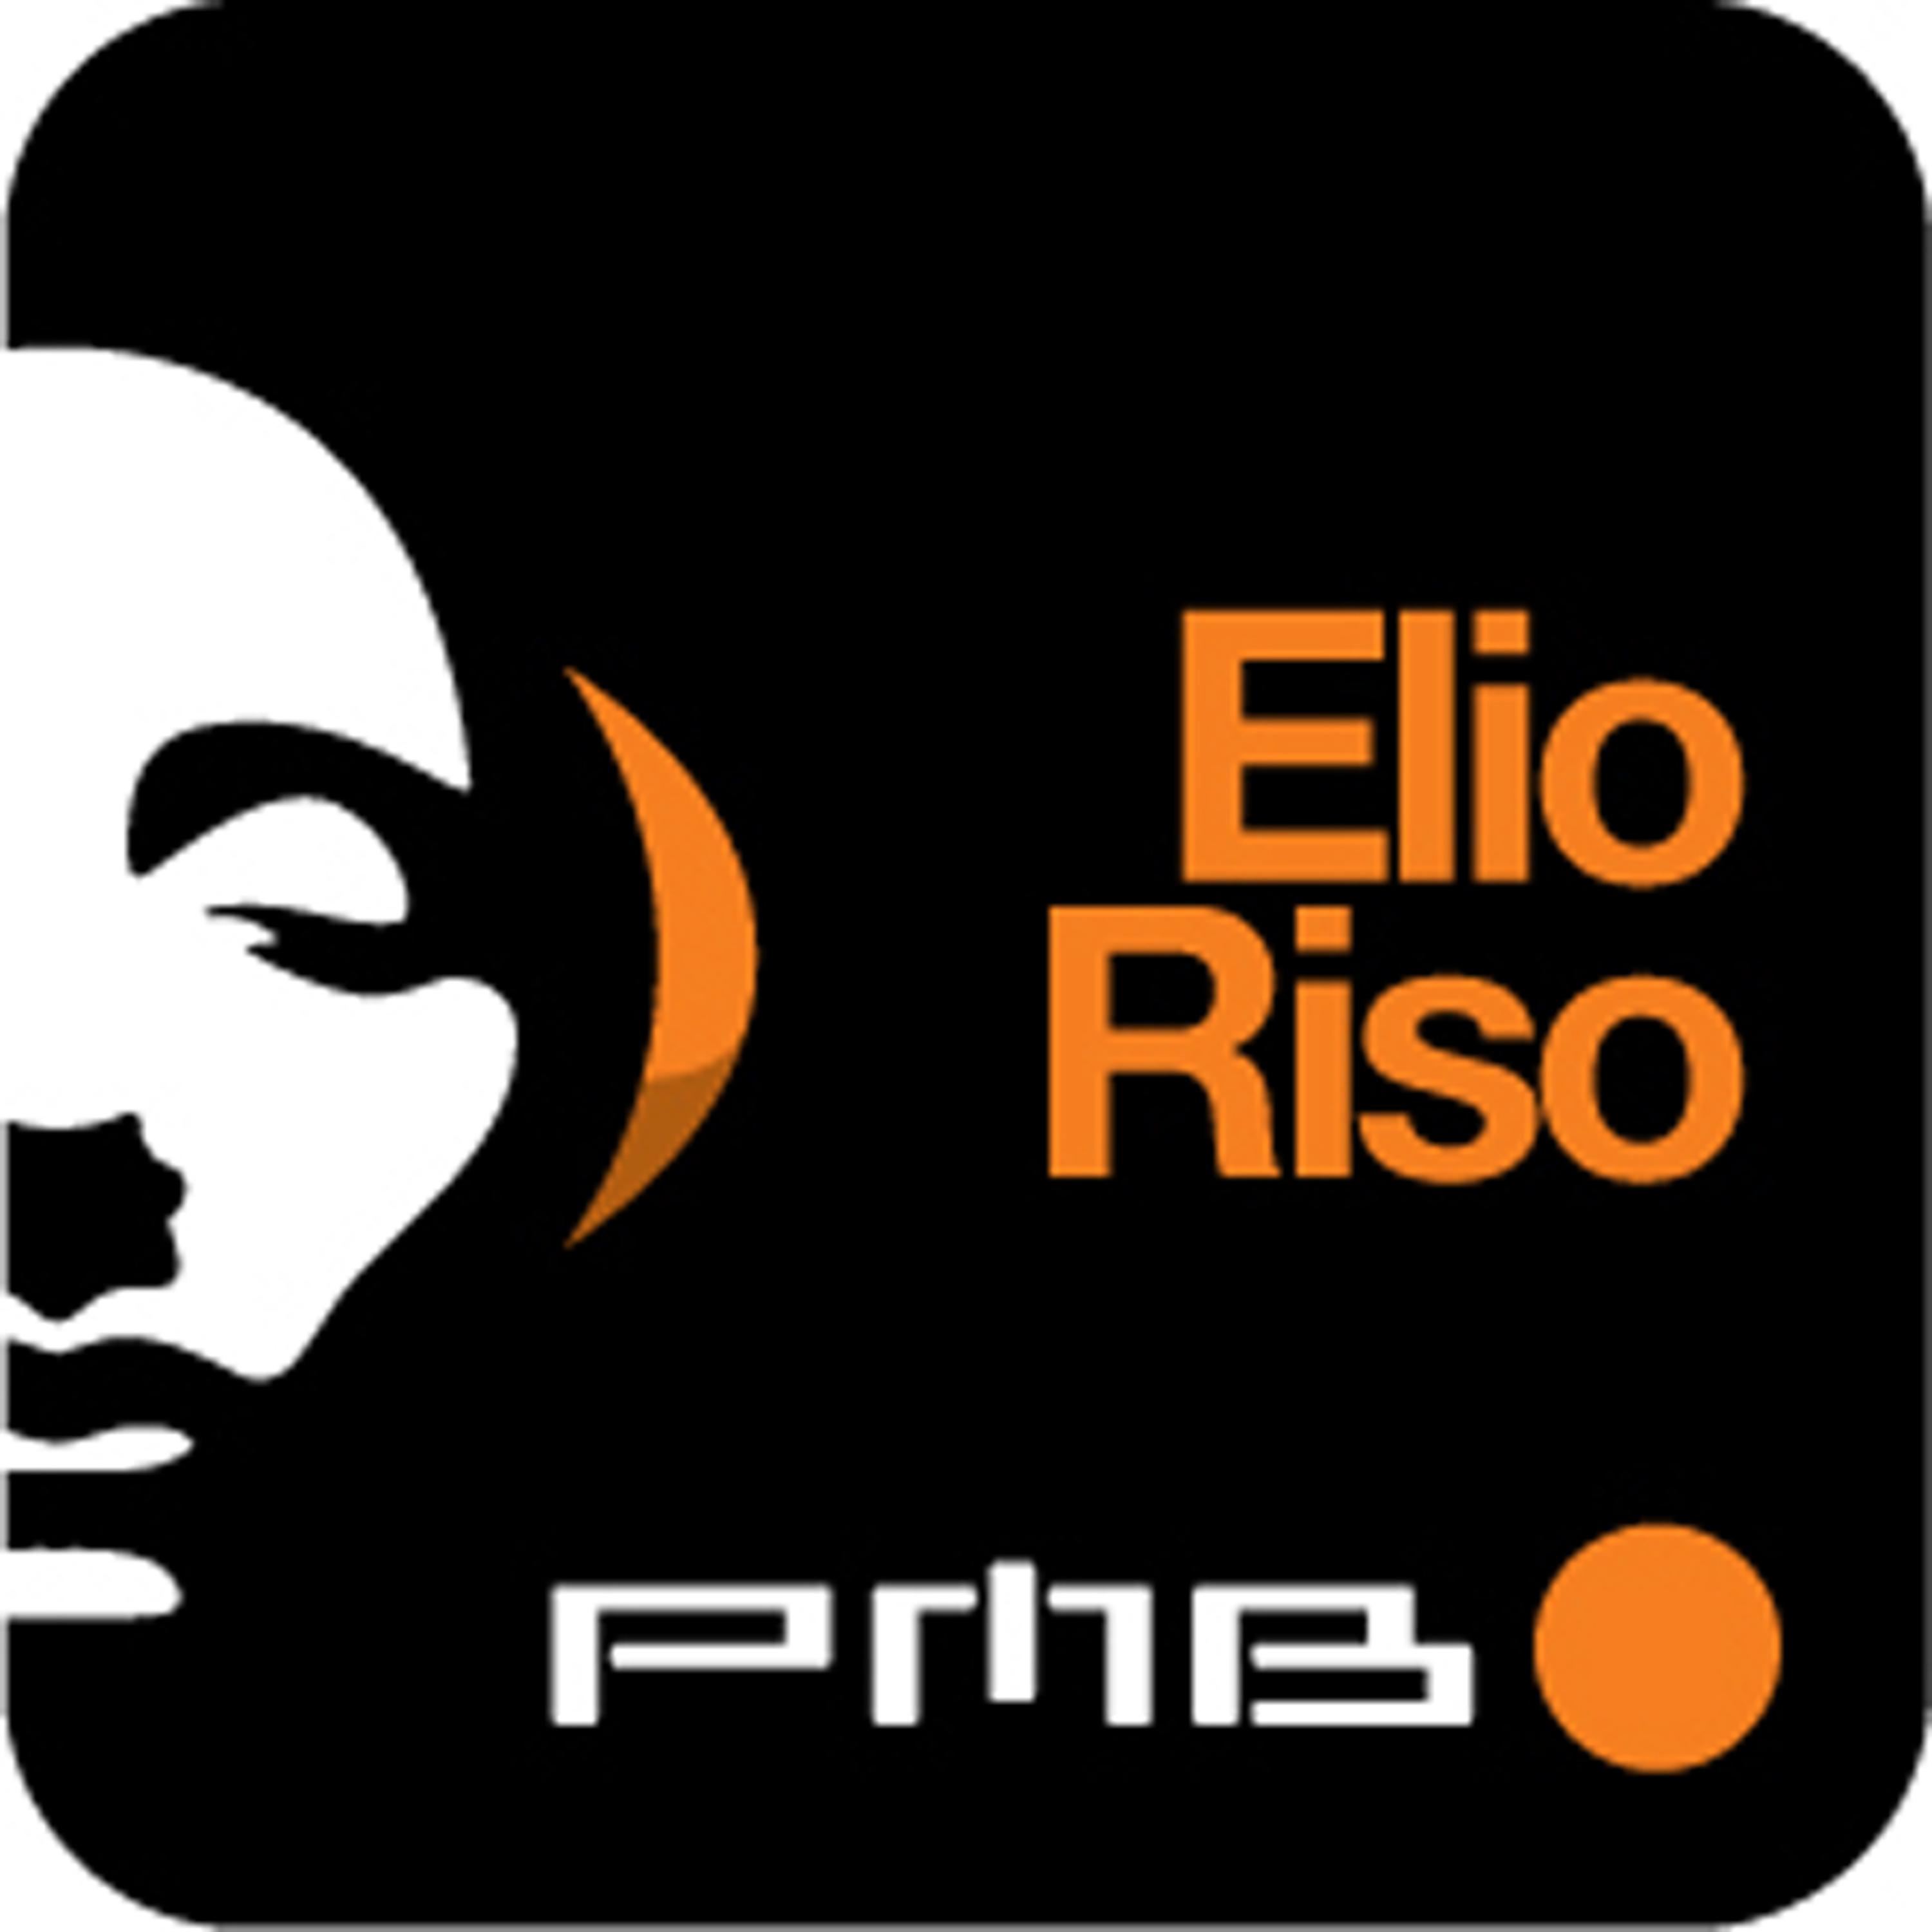 Come Back To Me (Elio Riso and Audioclash Mix)